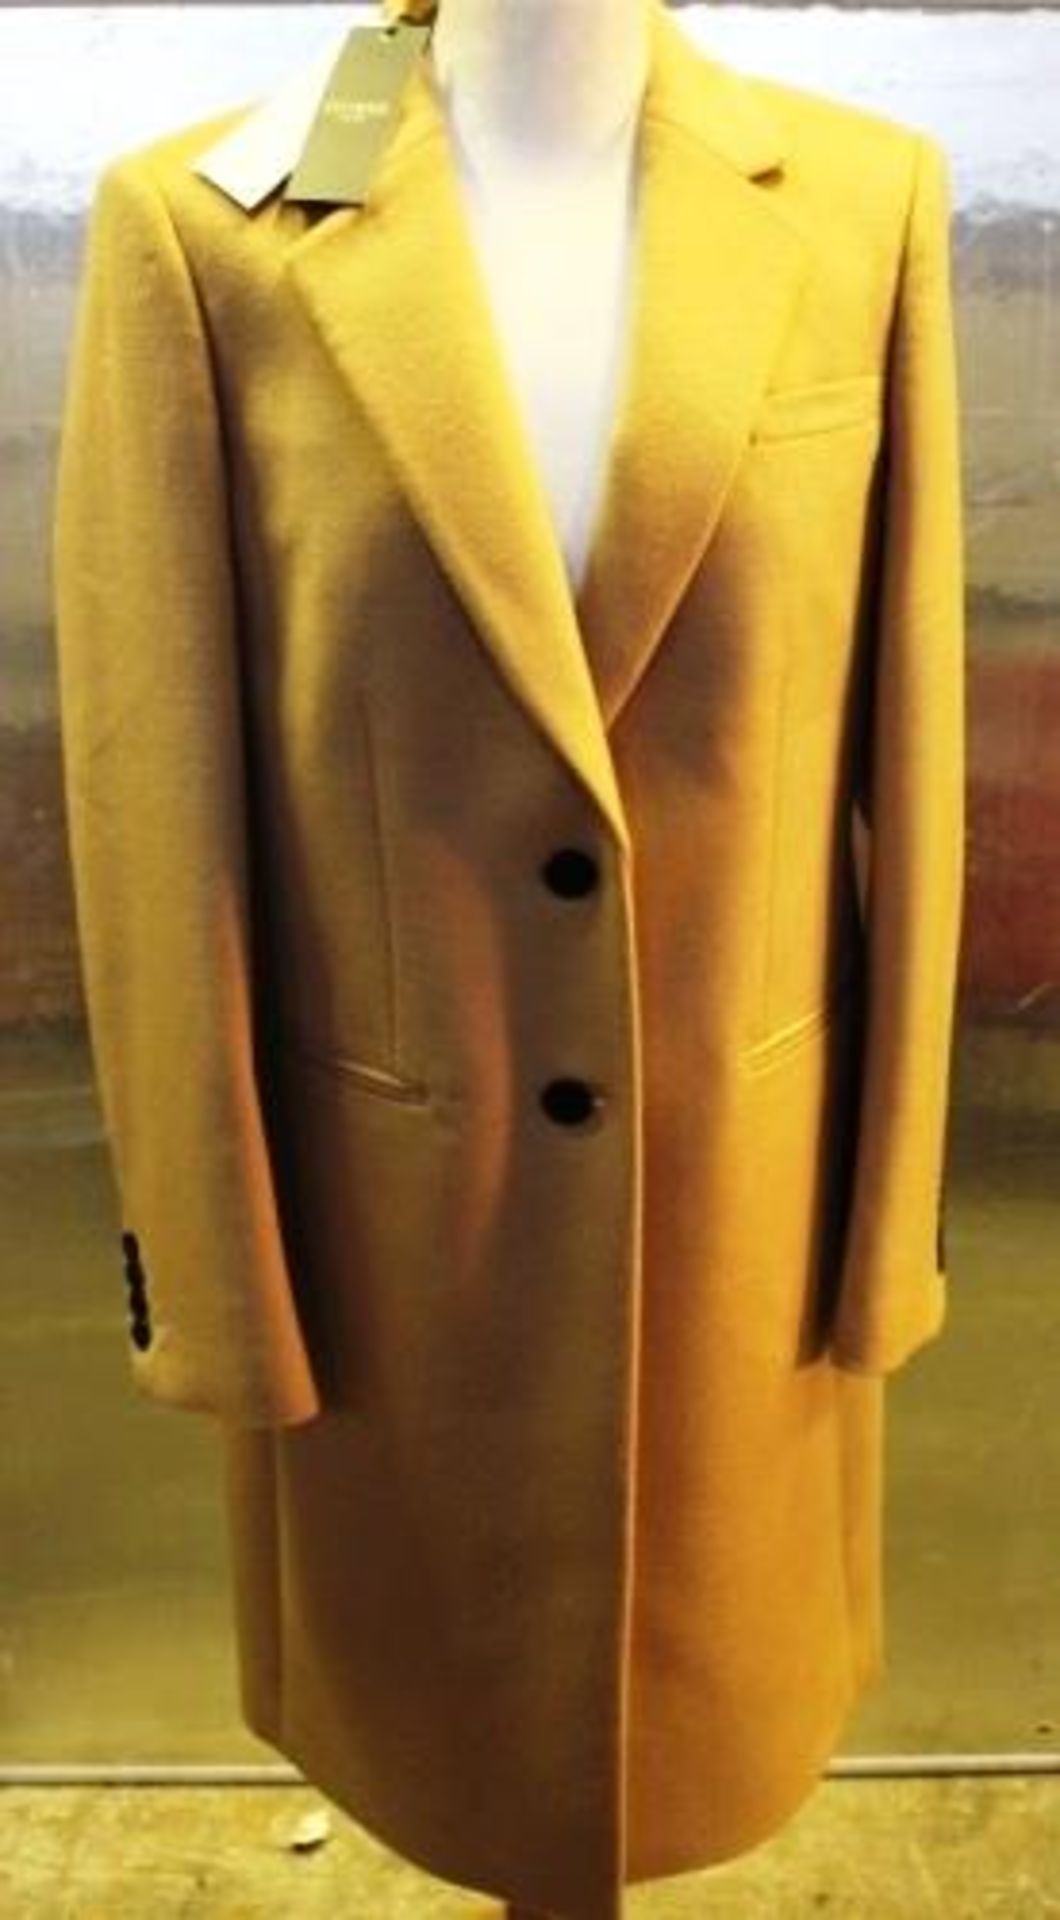 1 x Hobbs Tilda camel wool coat, UK size 10, RRP £299.00 - New with tags (clothesrail1)